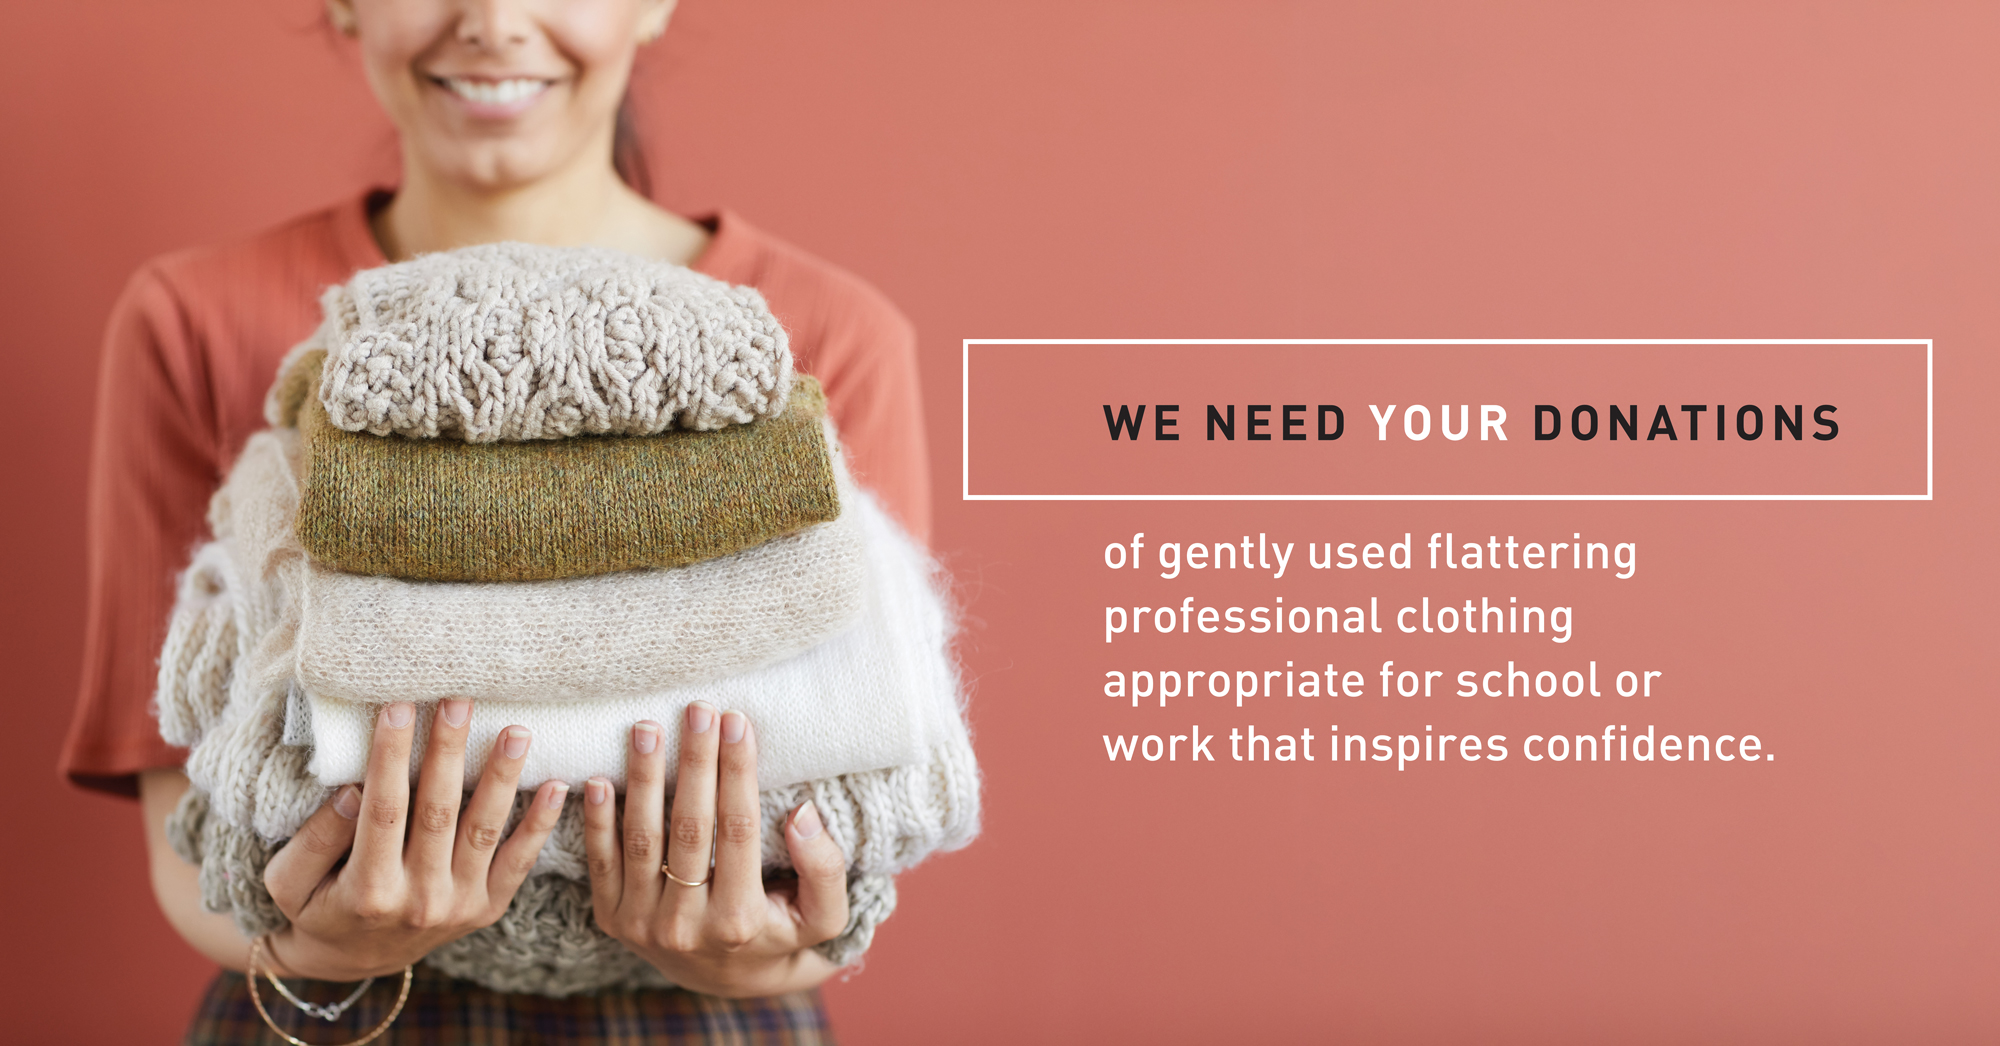 Clothes That Work needs gently-used clothing and accessories for